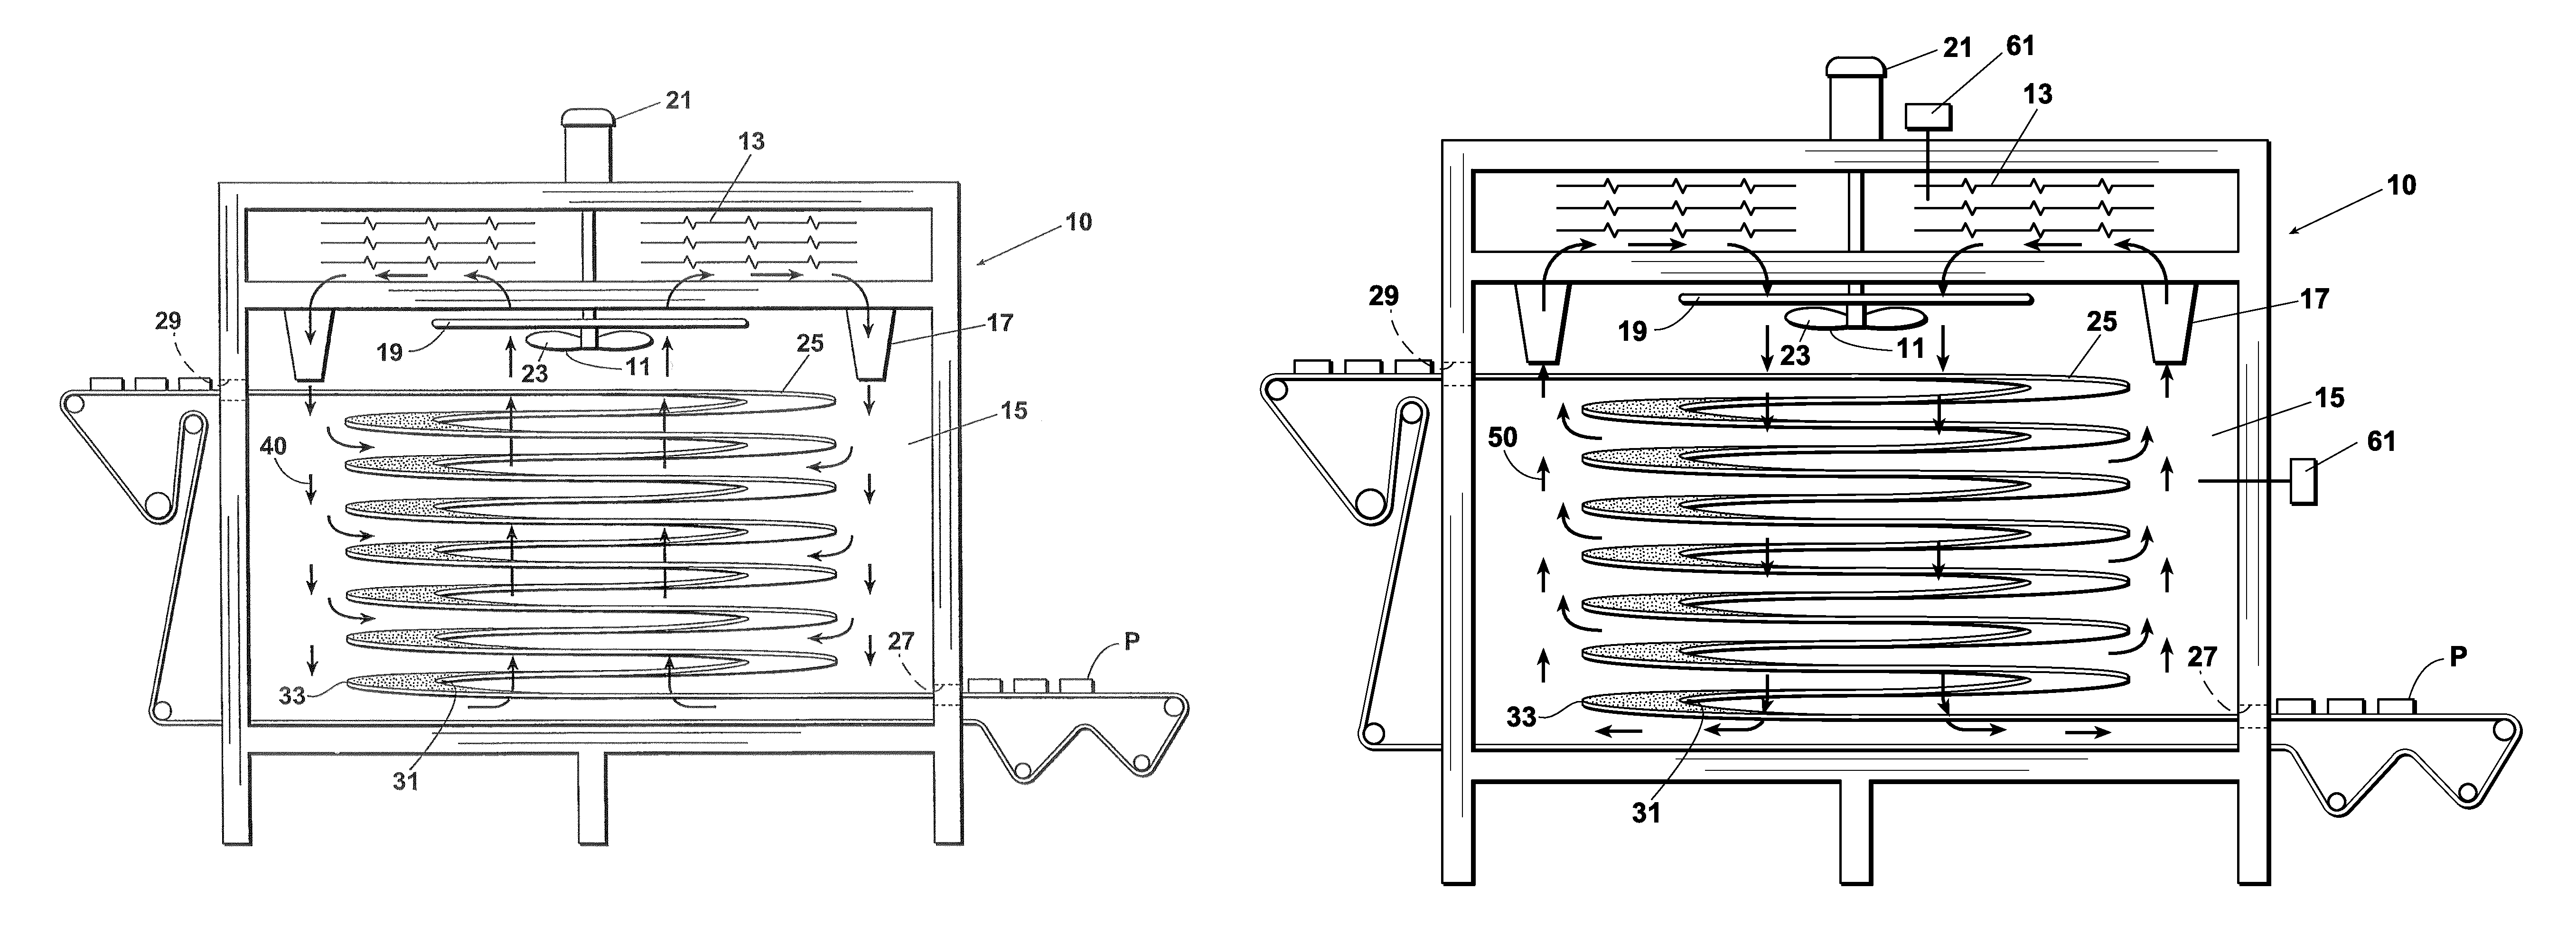 Airflow pattern for spiral ovens